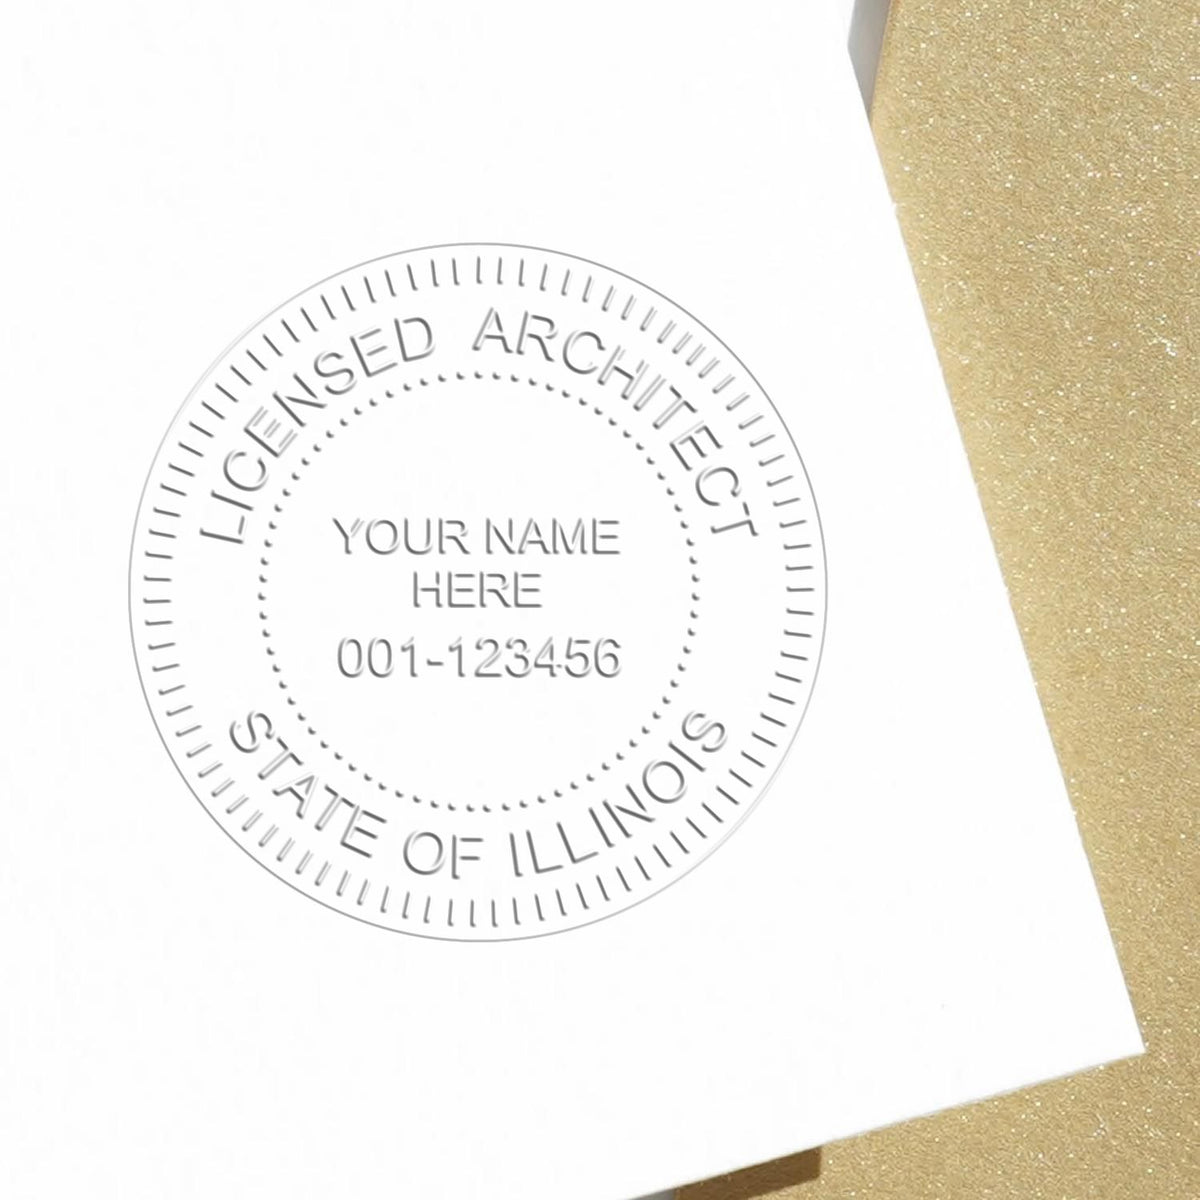 This paper is stamped with a sample imprint of the Extended Long Reach Illinois Architect Seal Embosser, signifying its quality and reliability.